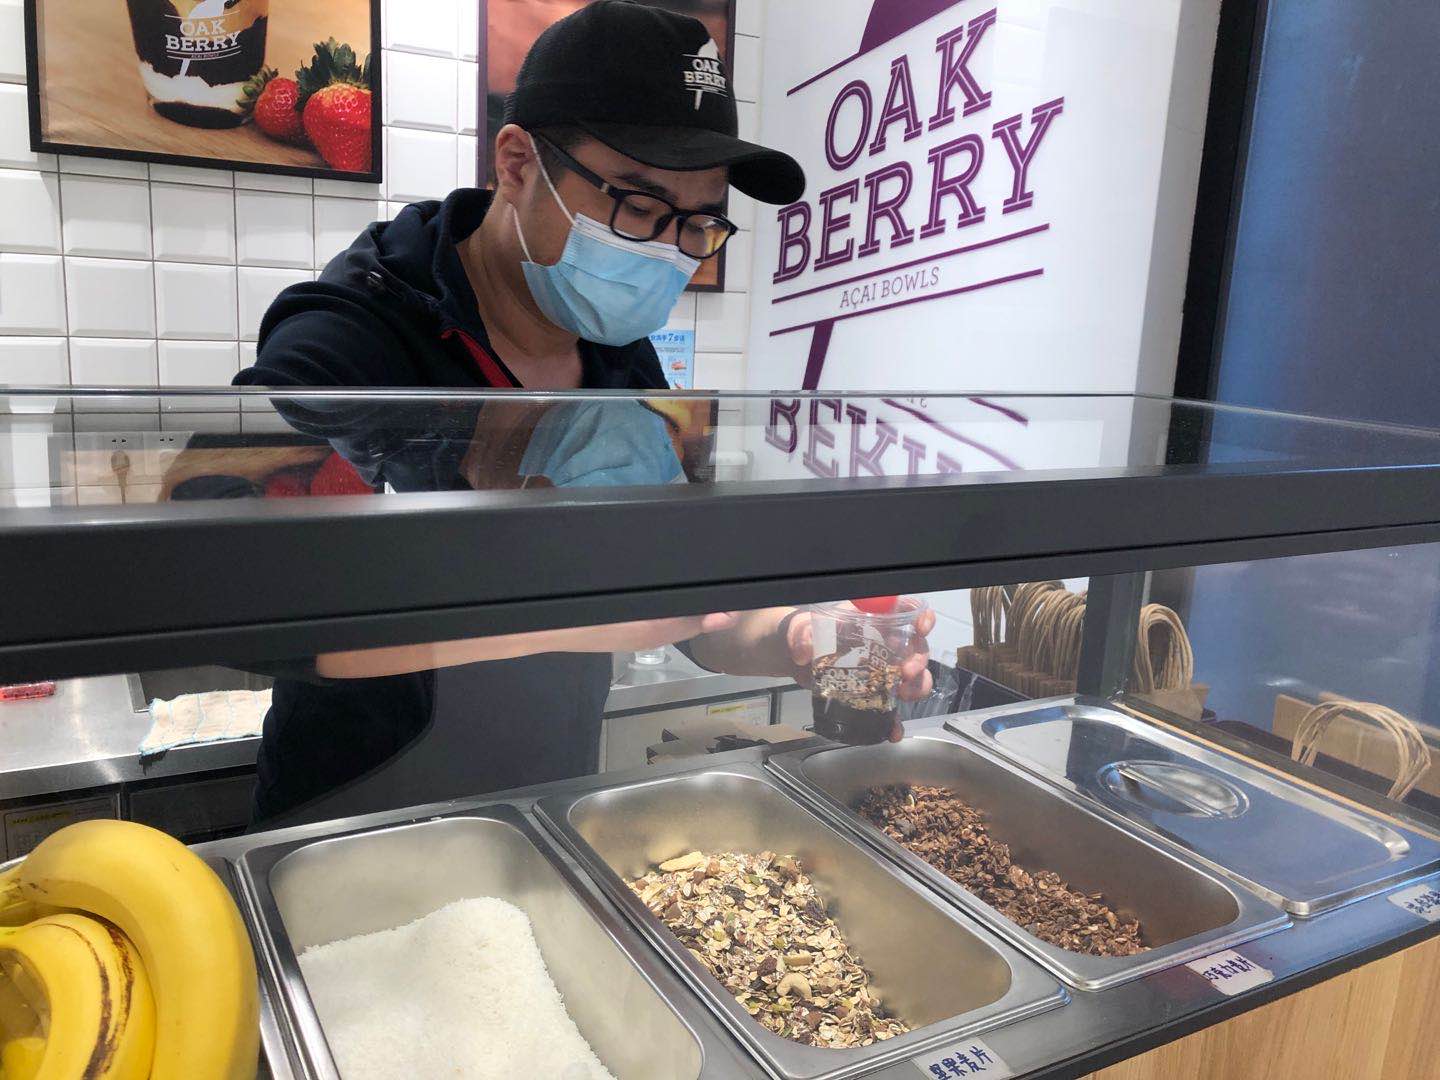 An employee serves a portion of açaí at Oakberry’s shop in Shanghai